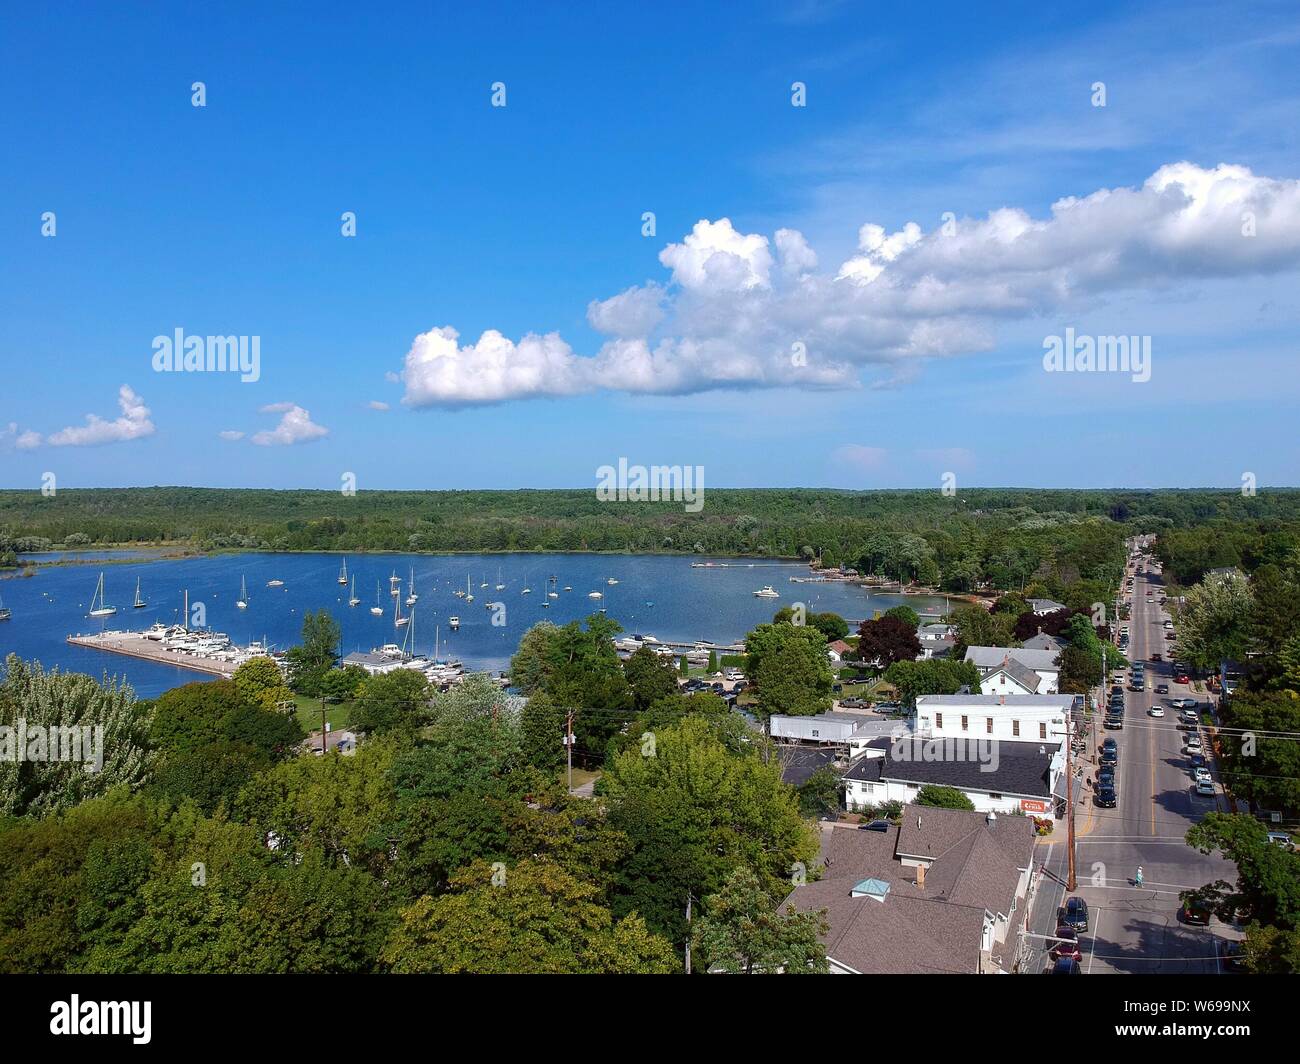 Drone shot of Dane County Wisconsin looking down onto road and lake with boats Stock Photo